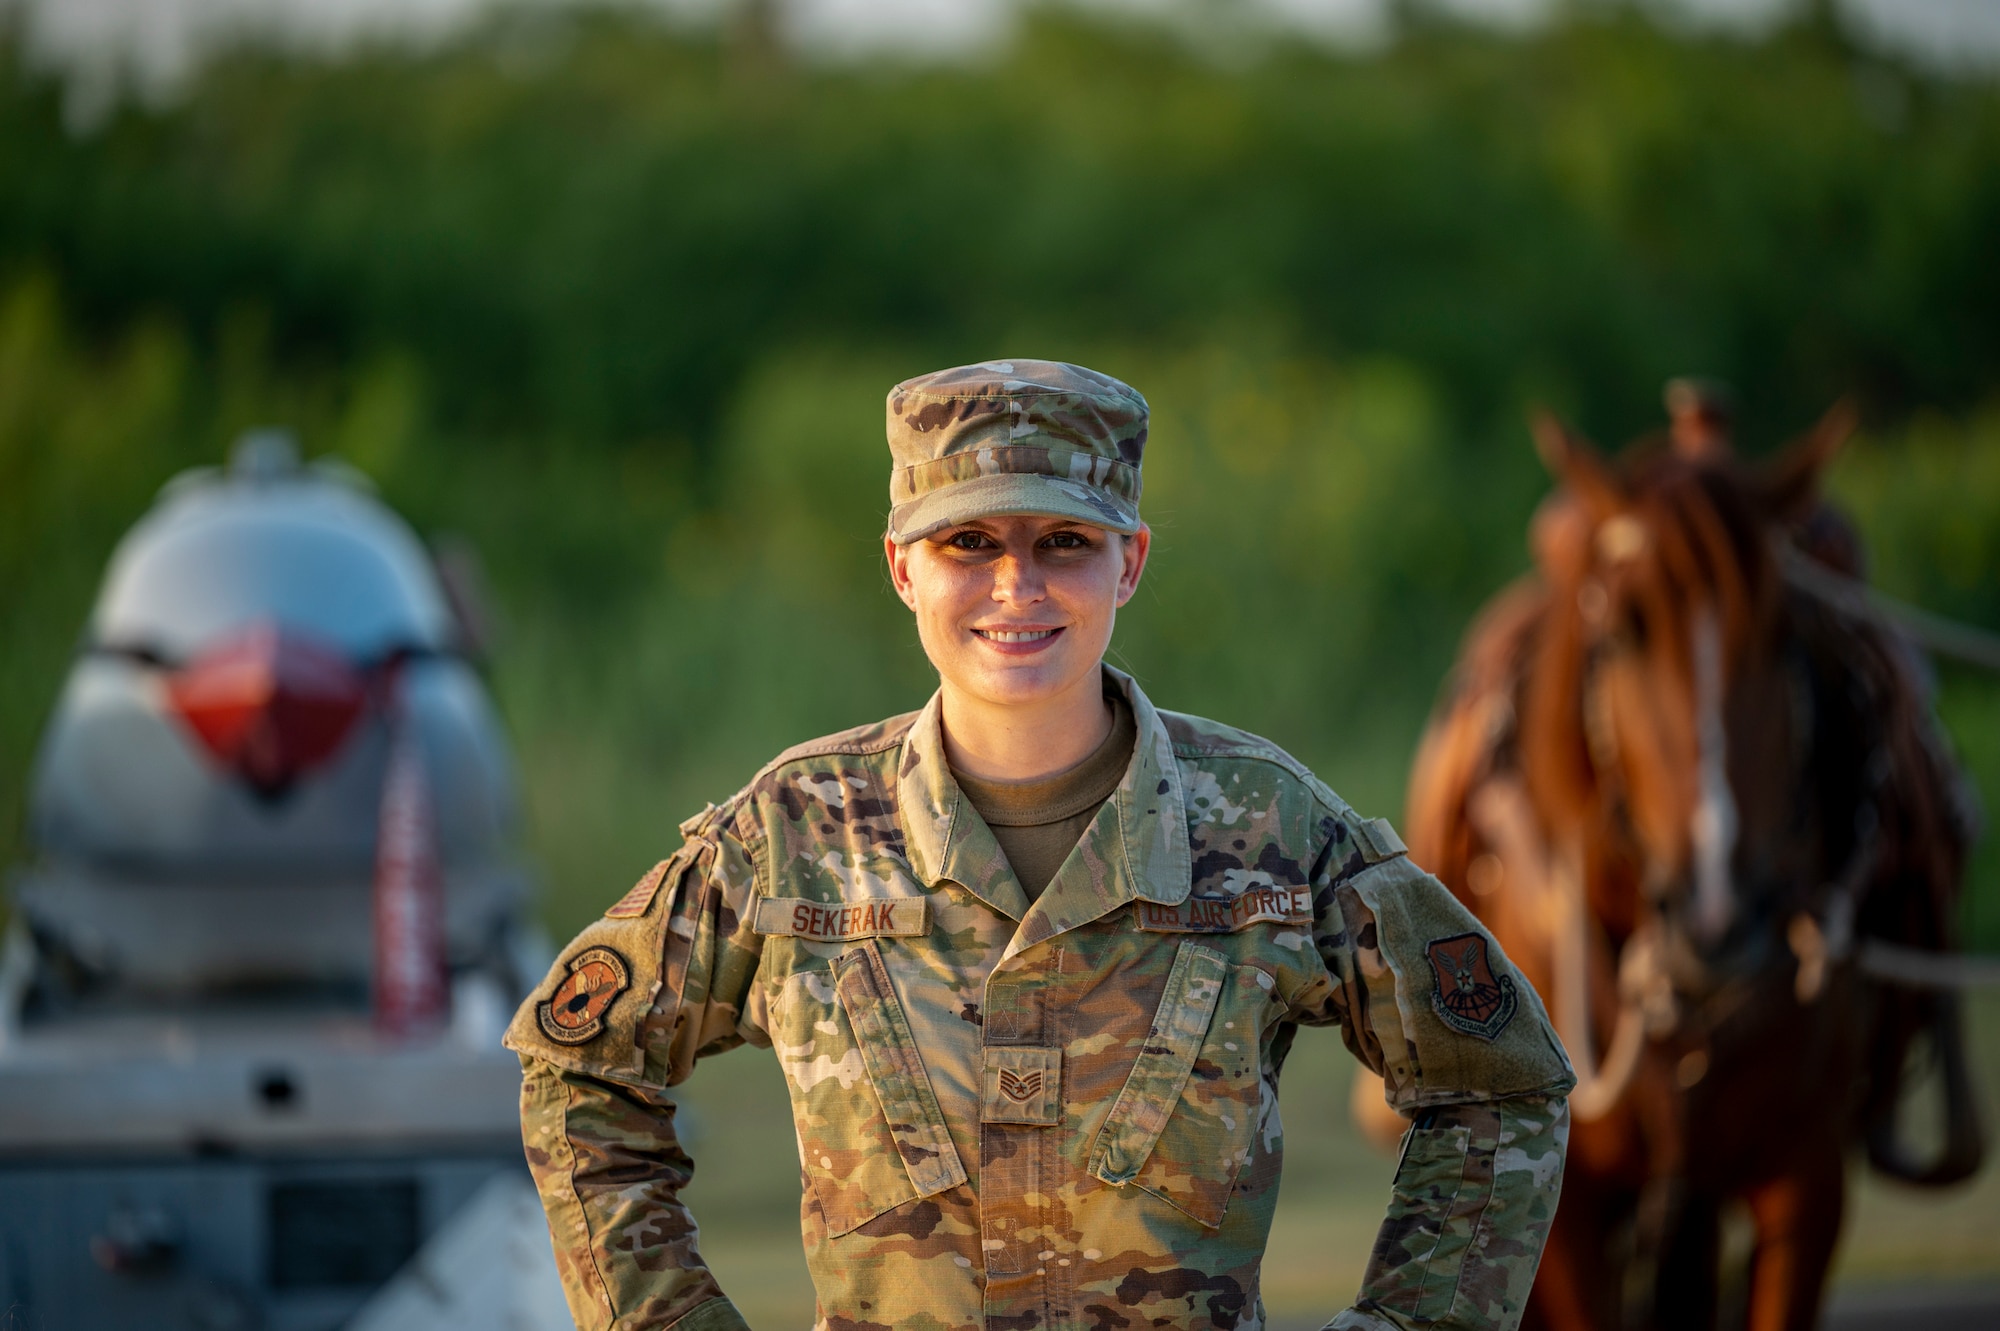 Staff Sgt. Melissa Sekerak, 7th Munitions Squadron stockpile management supervisor, poses for a photo with her horse, Malibu, and an inert munition at Dyess Air Force Base, Texas, Aug. 5, 2021.